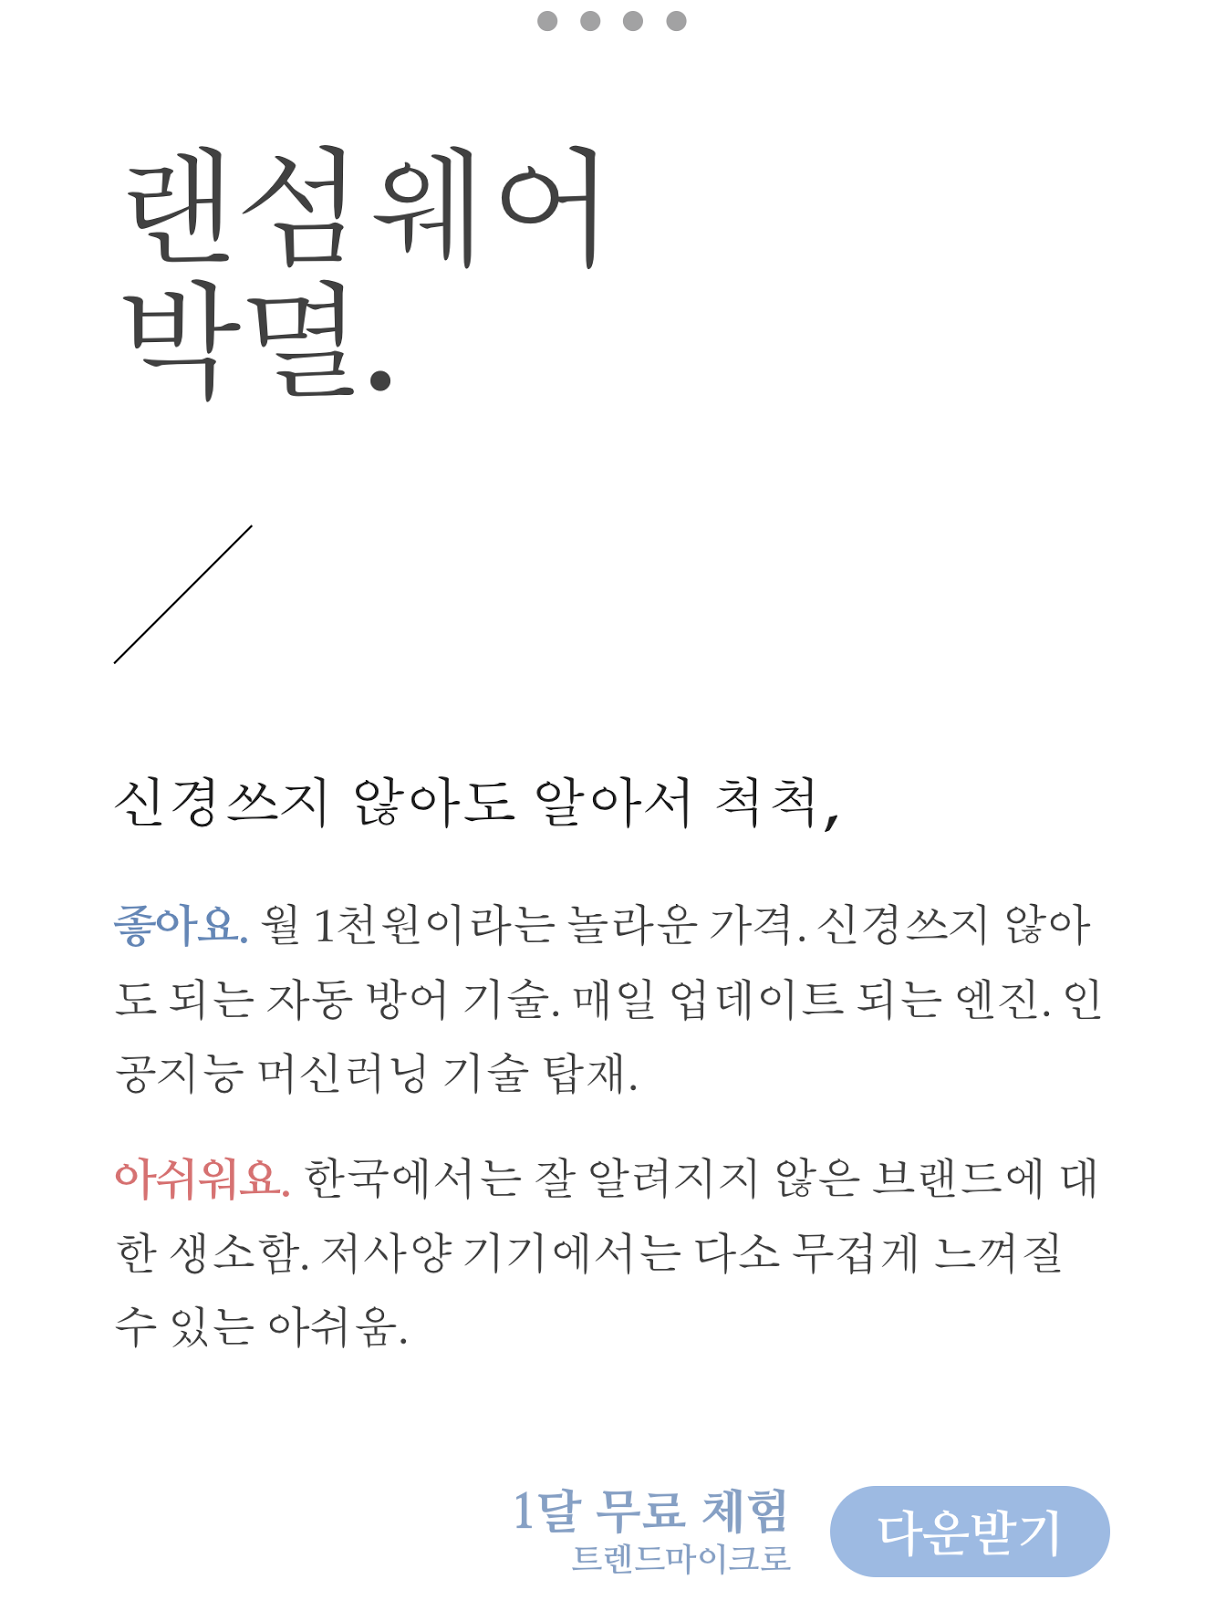 http://safetrend.kr/download_trial.php